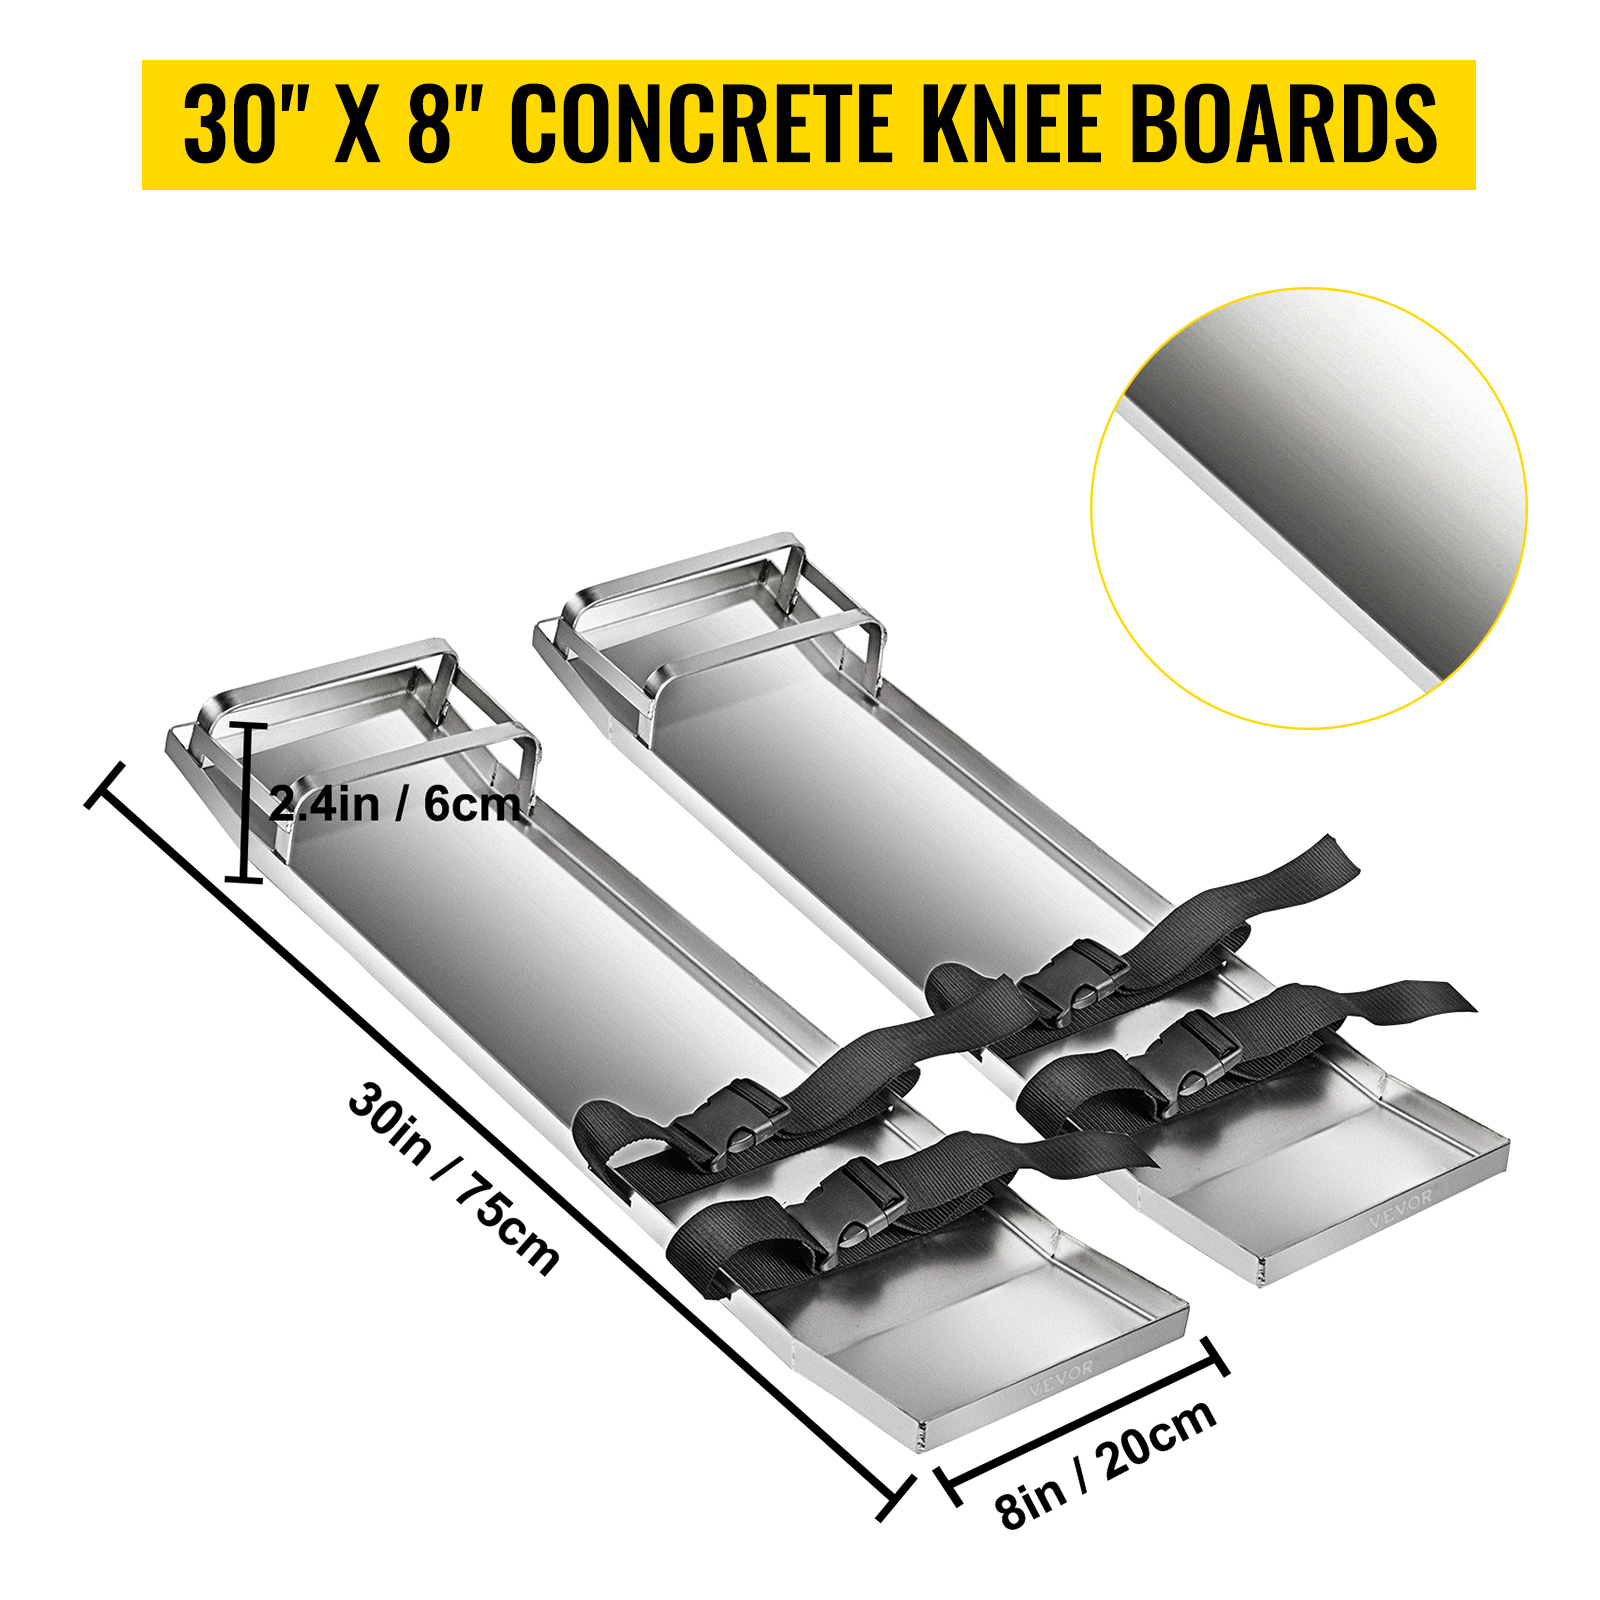 How to use concrete knee board sliders 